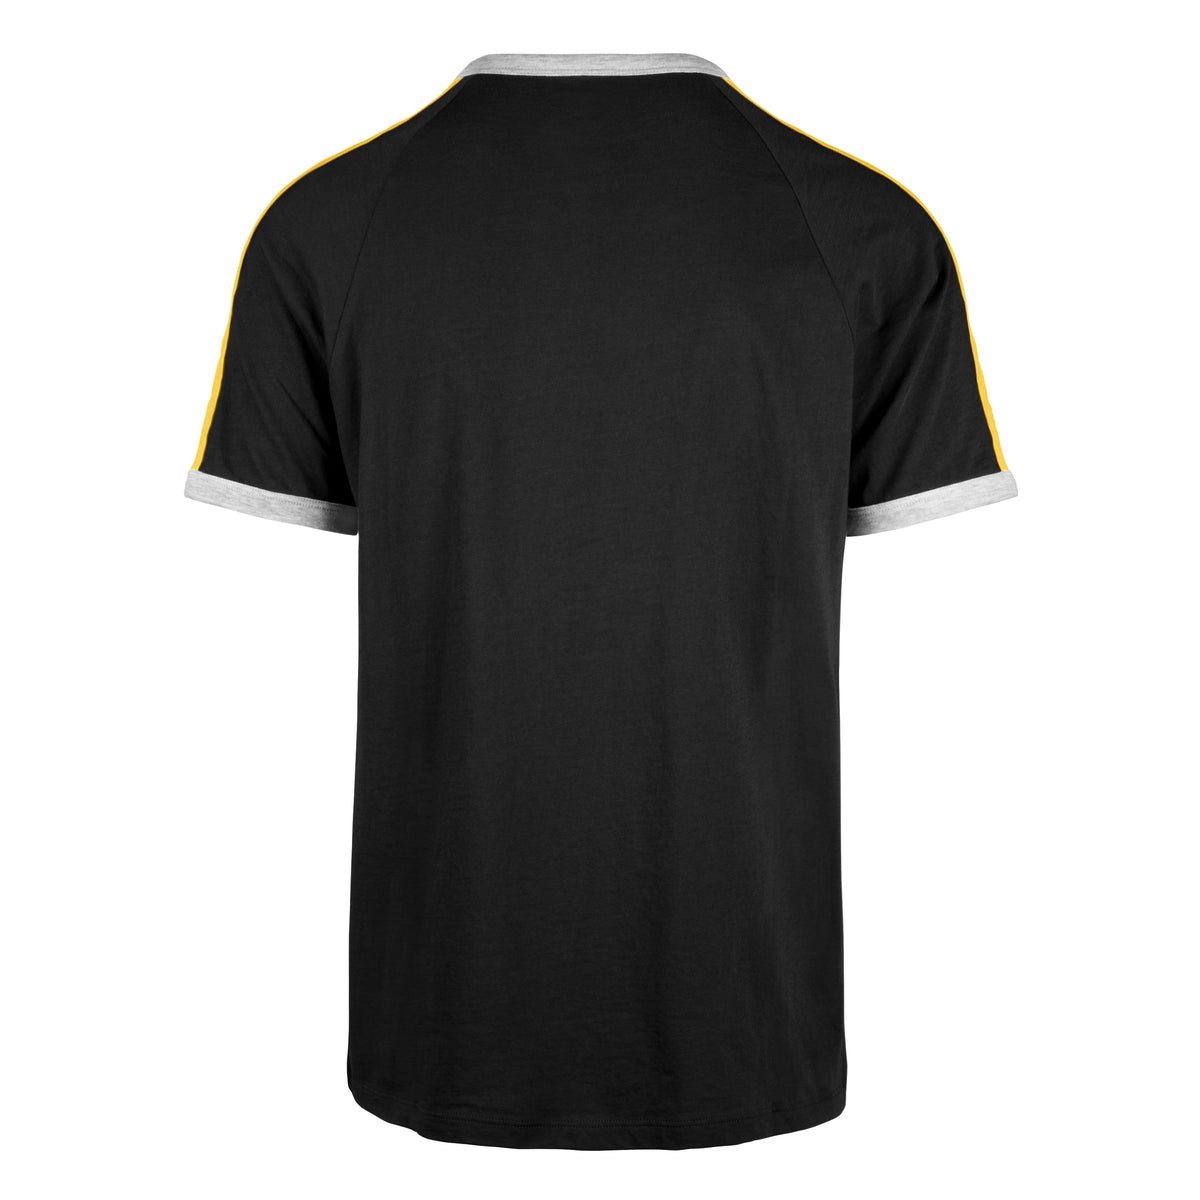 PITTSBURGH PIRATES PREMIER '47 TOWNSEND TEE